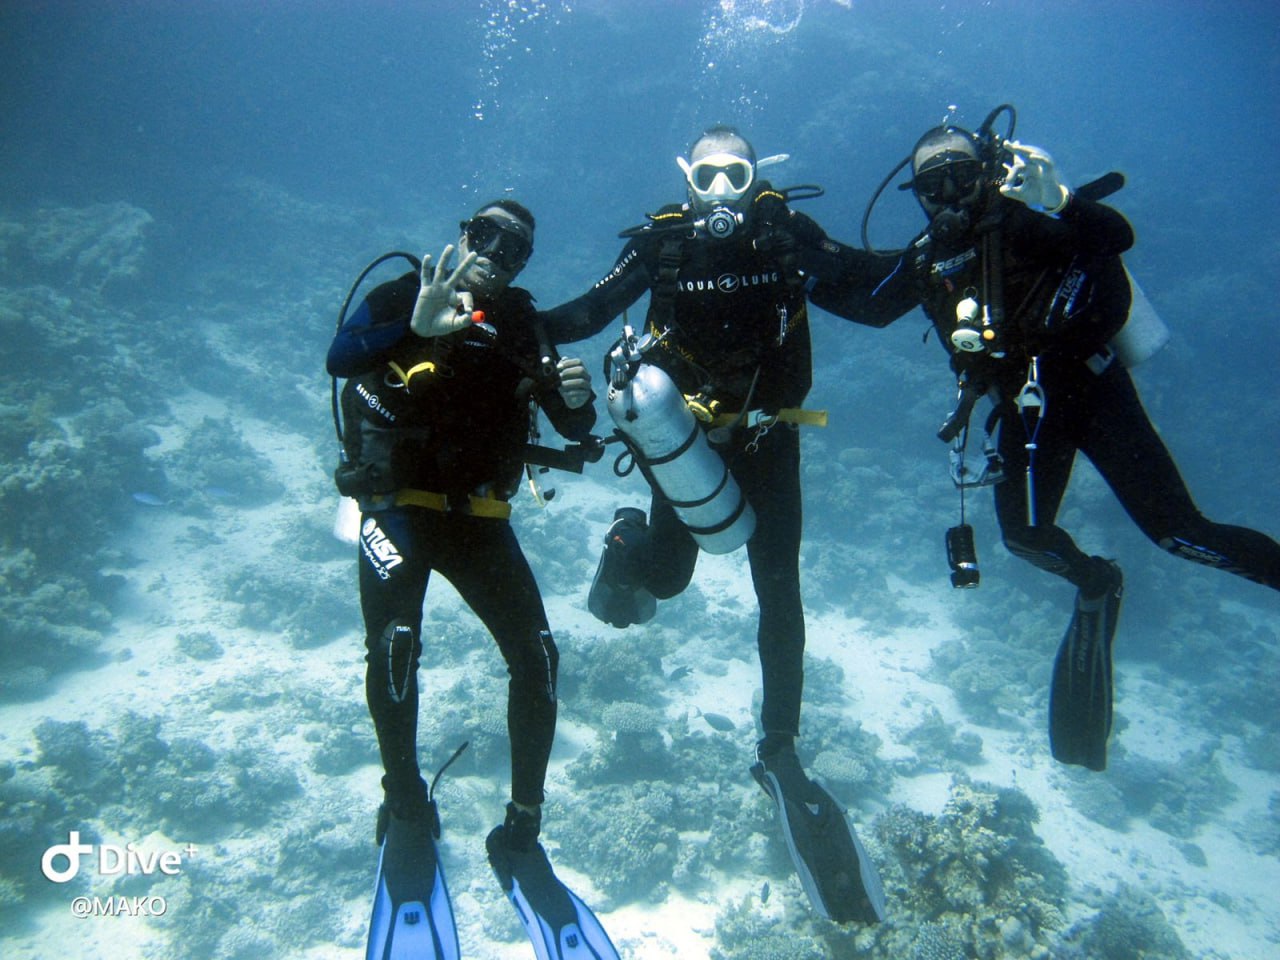 Advanced Open Water Diver course